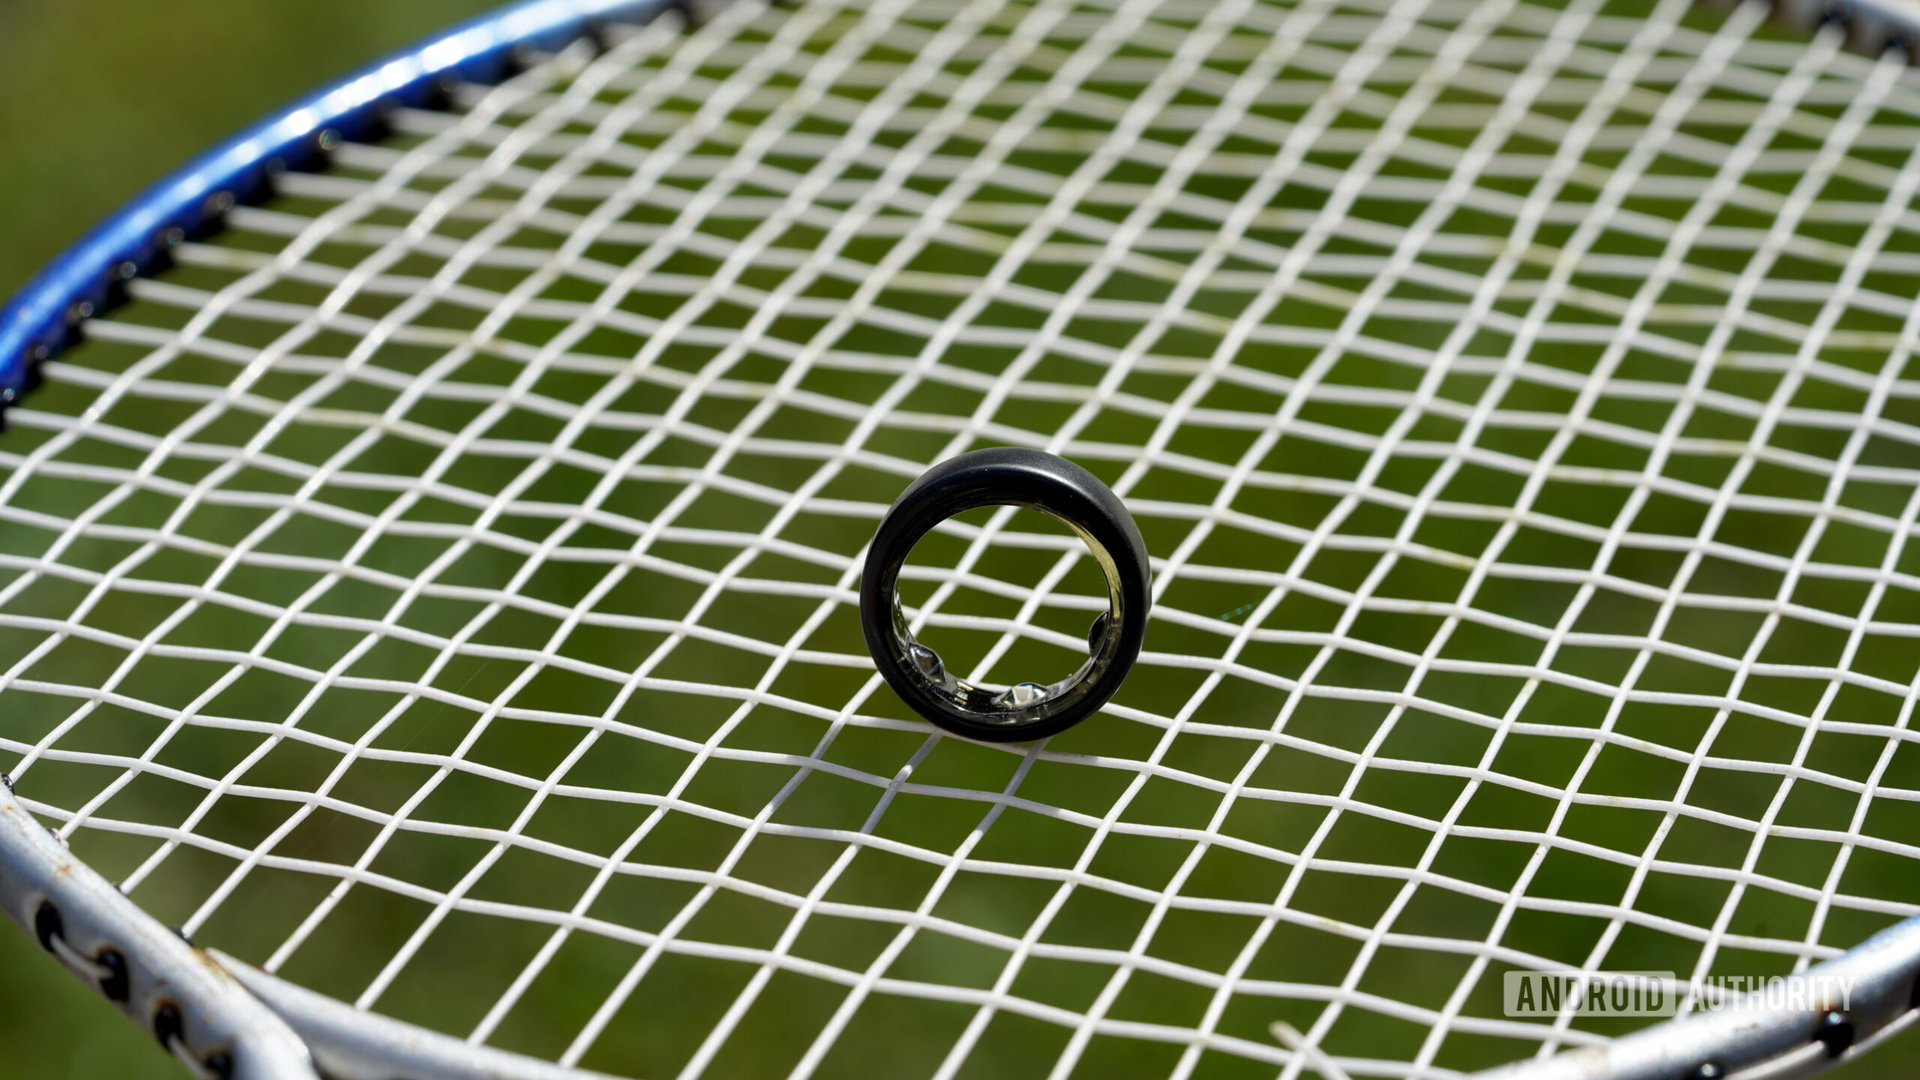 An Oura Ring 3 stands upright on a badminton racket.